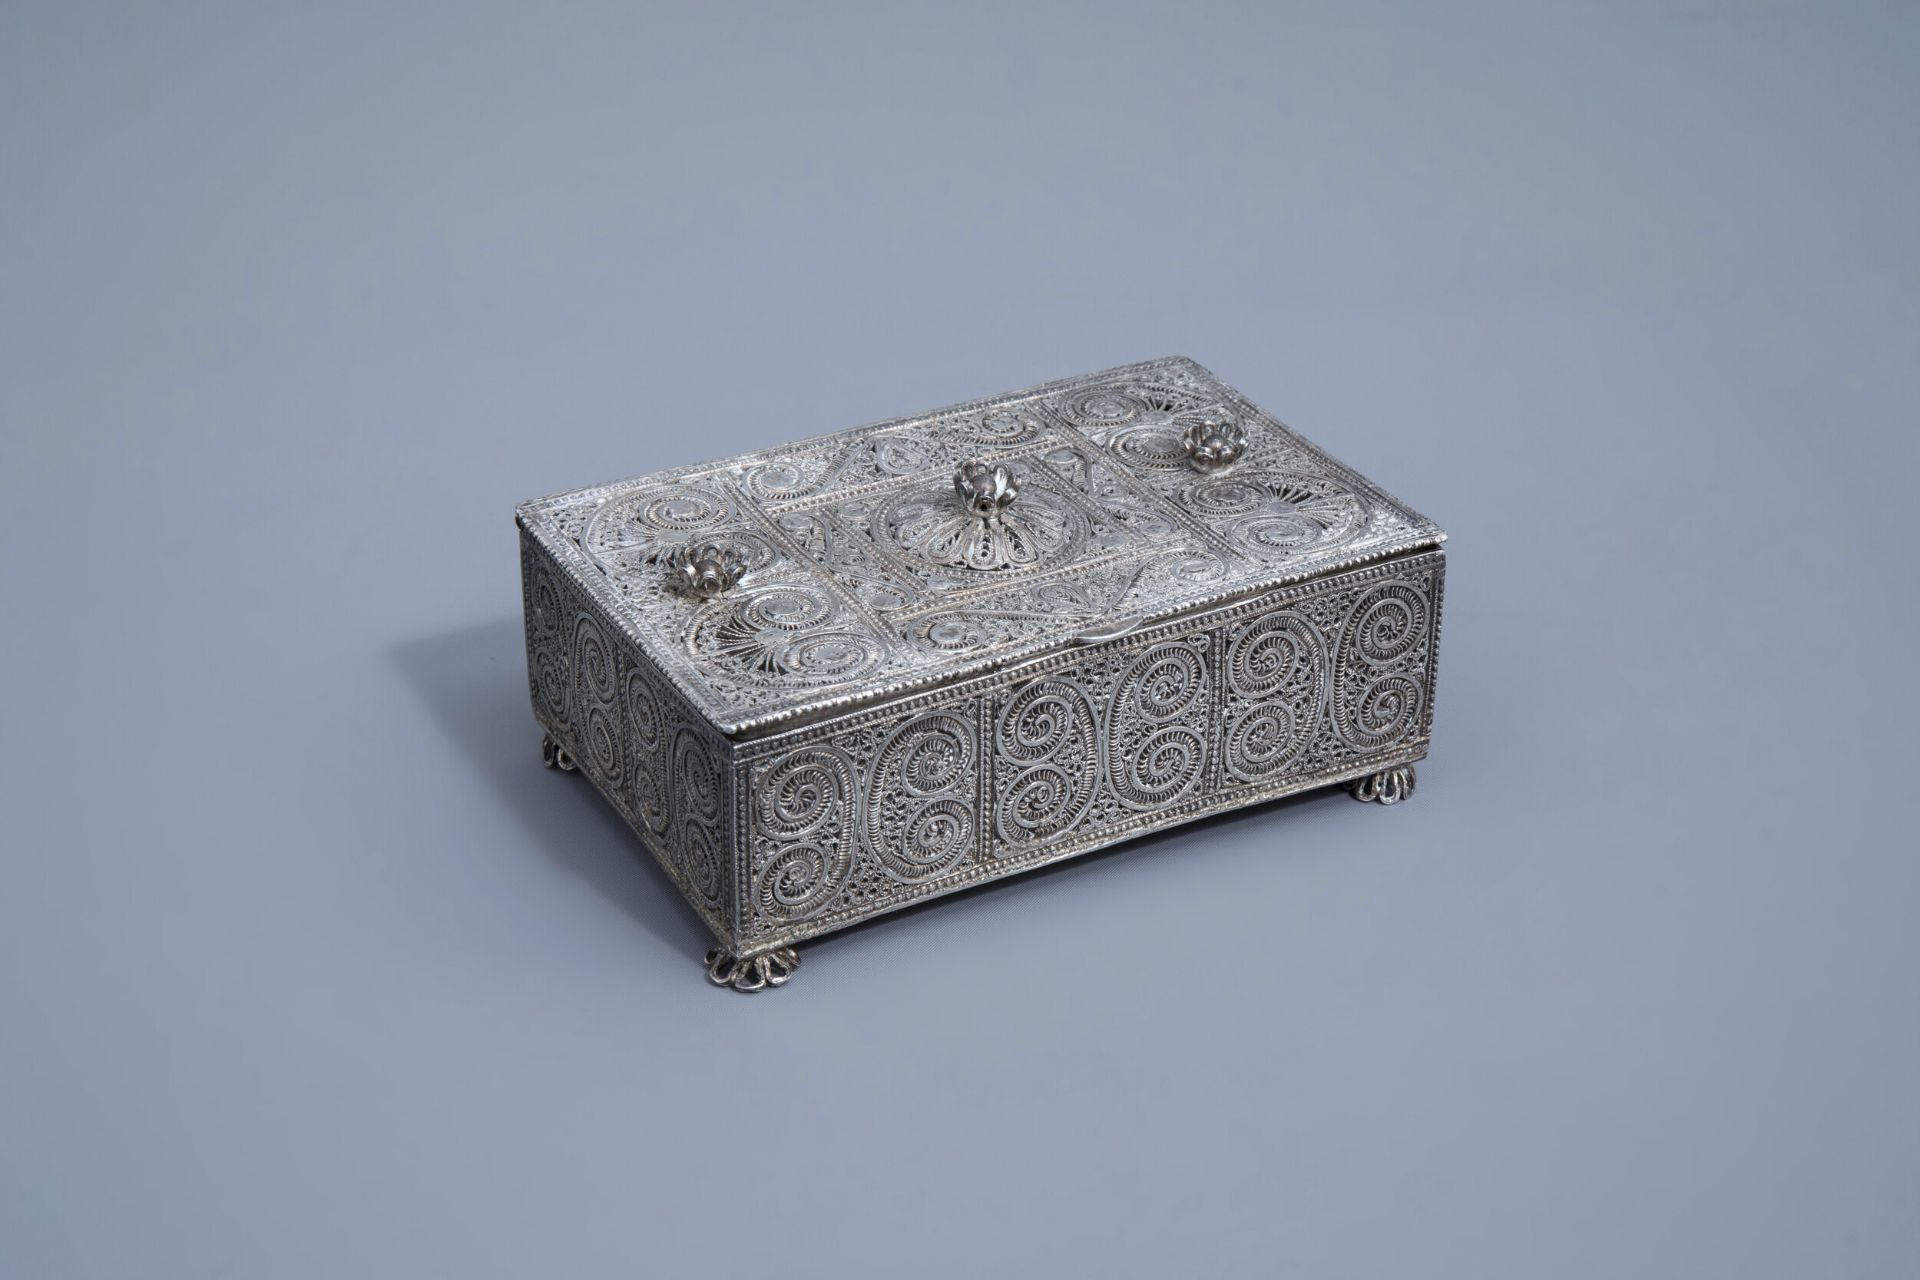 A silver filigree casket with floral design, 835/000, various marks, 19th/20th C.